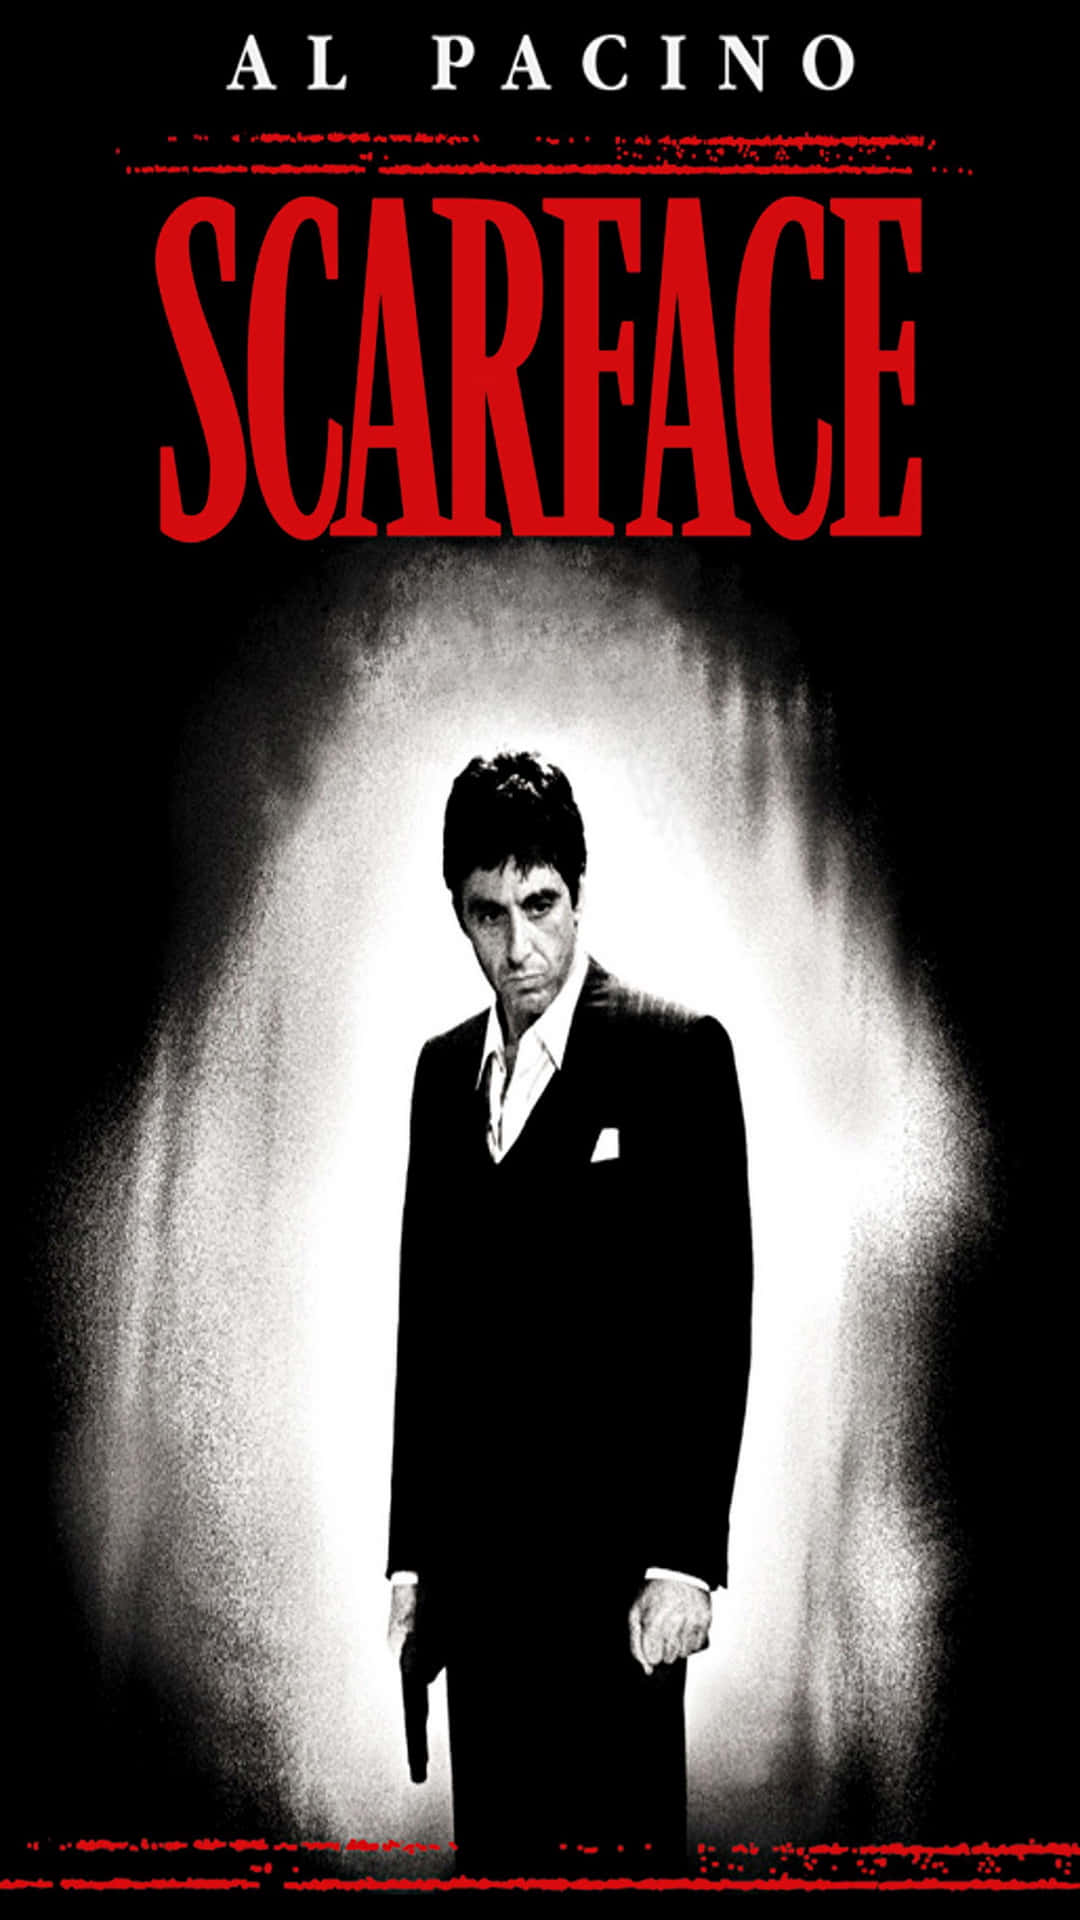 Scarface Iphone 1080 X 1920 Wallpaper